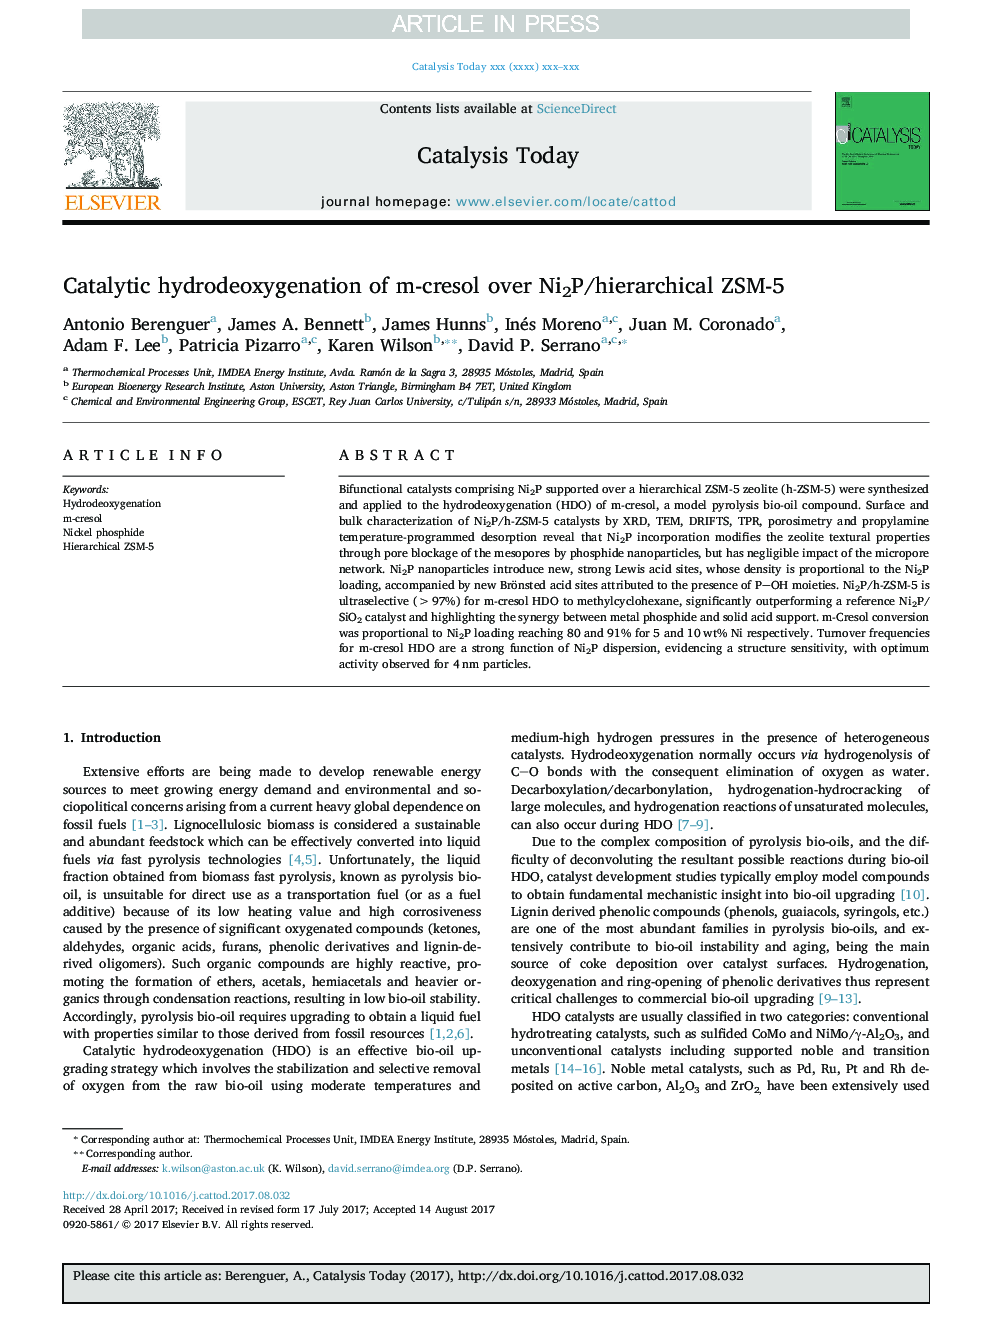 Catalytic hydrodeoxygenation of m-cresol over Ni2P/hierarchical ZSM-5